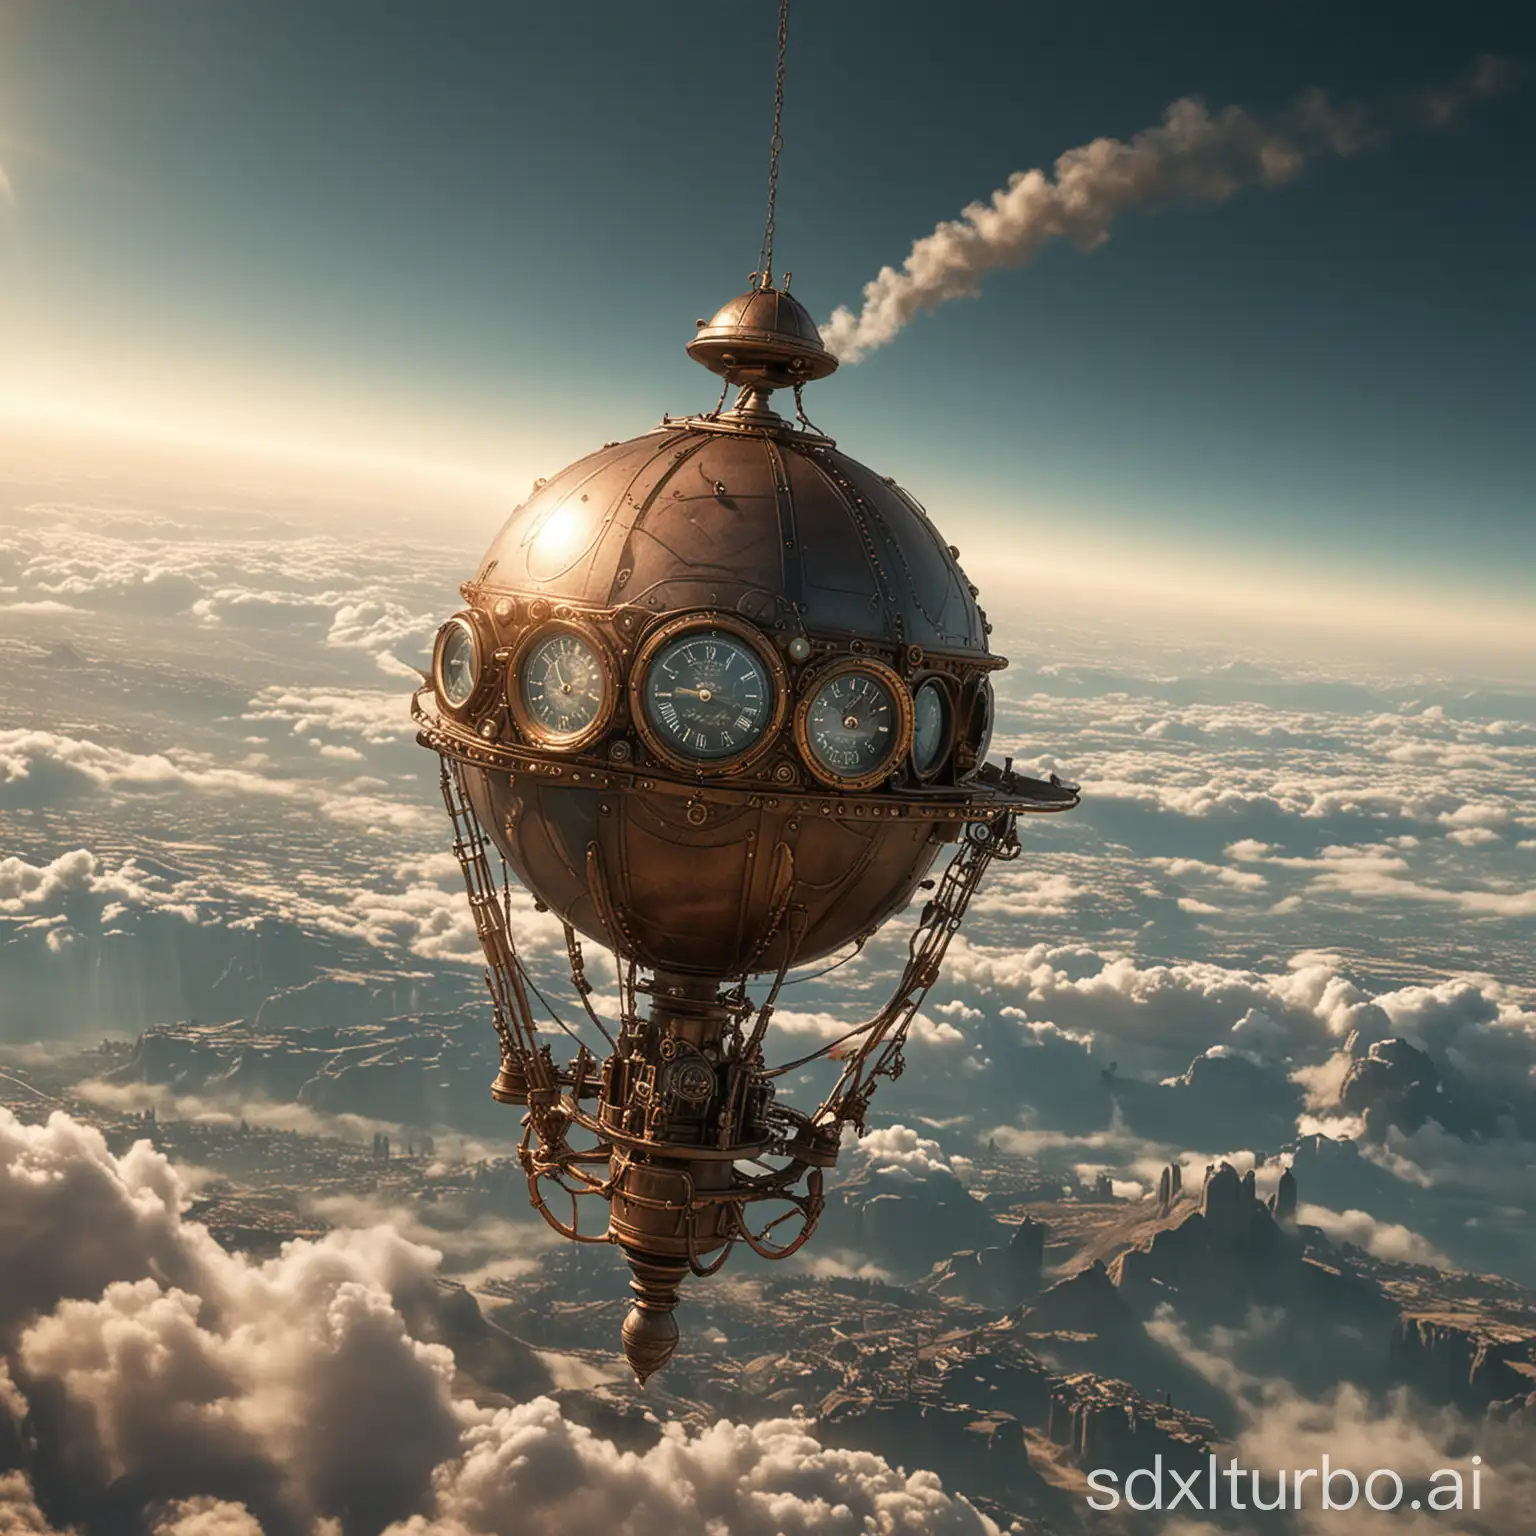 1910-Steam-Punk-Time-Machine-Orb-Flying-Above-Earth